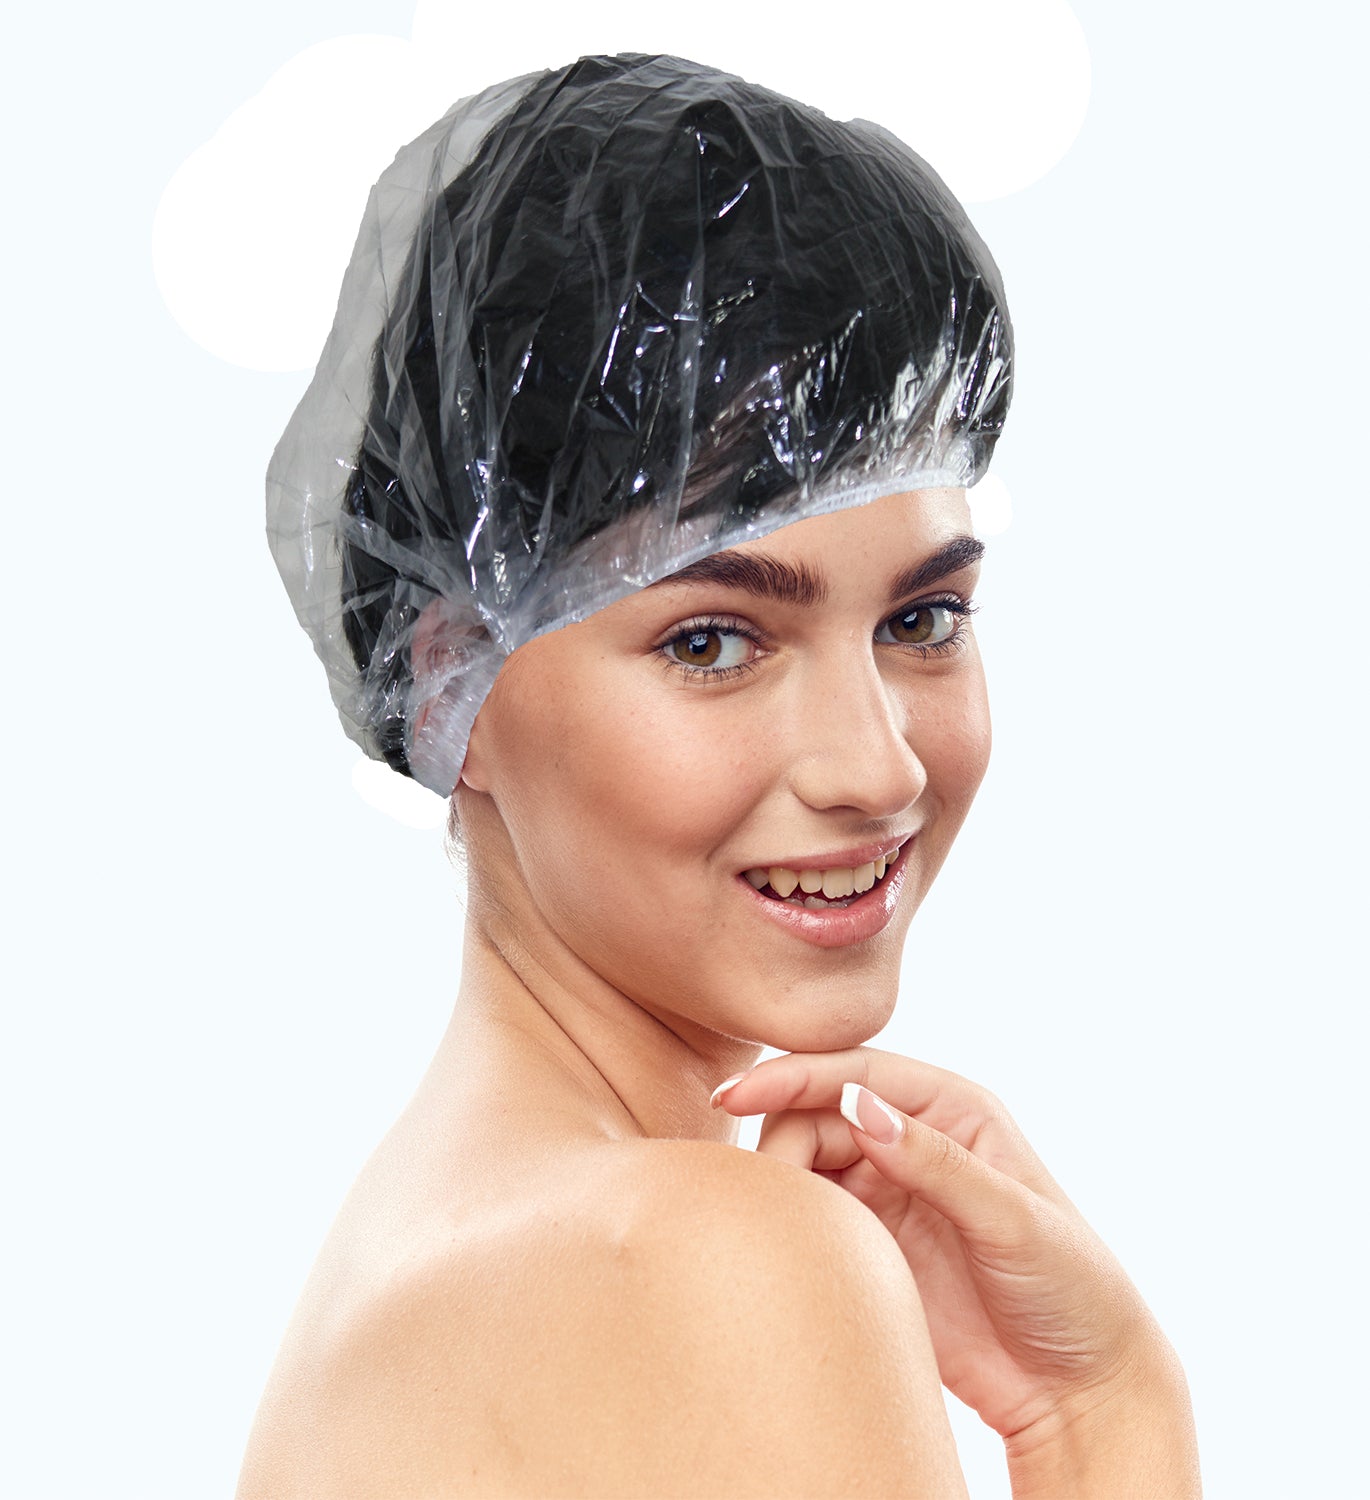 30 Disposable Shower Hair Caps Clear Waterproof UK Free Delivery Bodylife Beauty